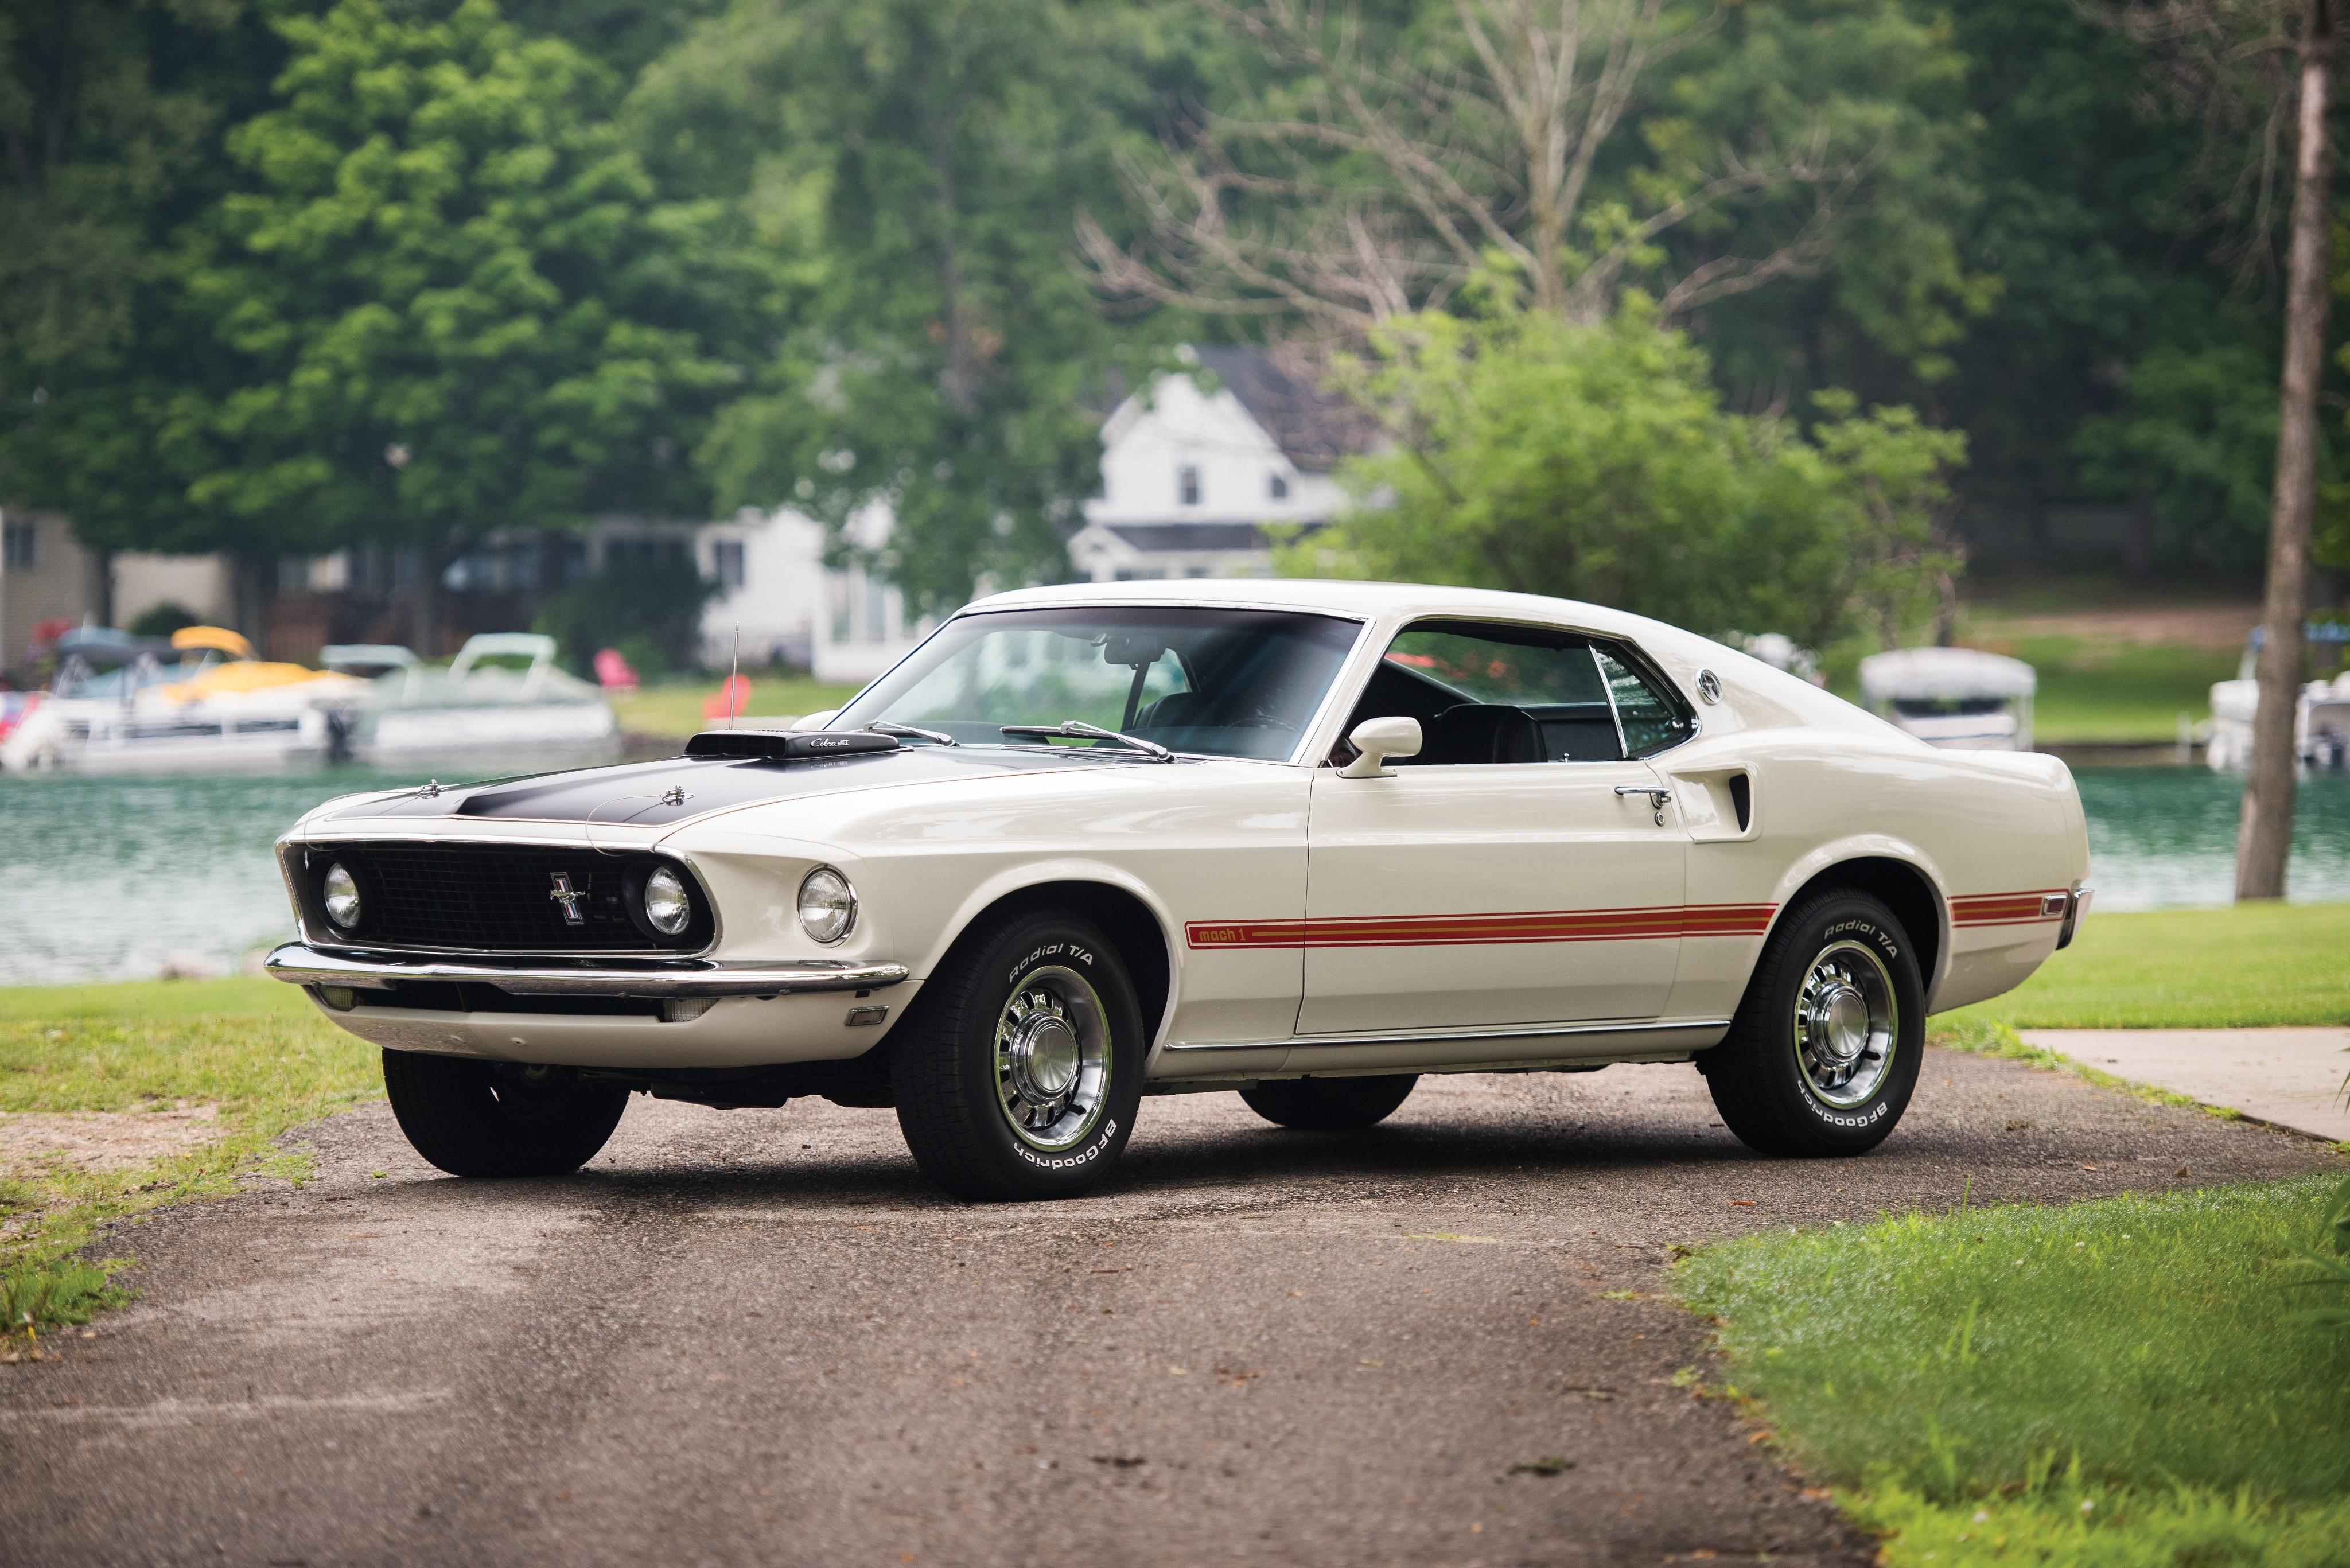 Ford Mustang Mach 1 4k Ultra HD Wallpaper. Background Image